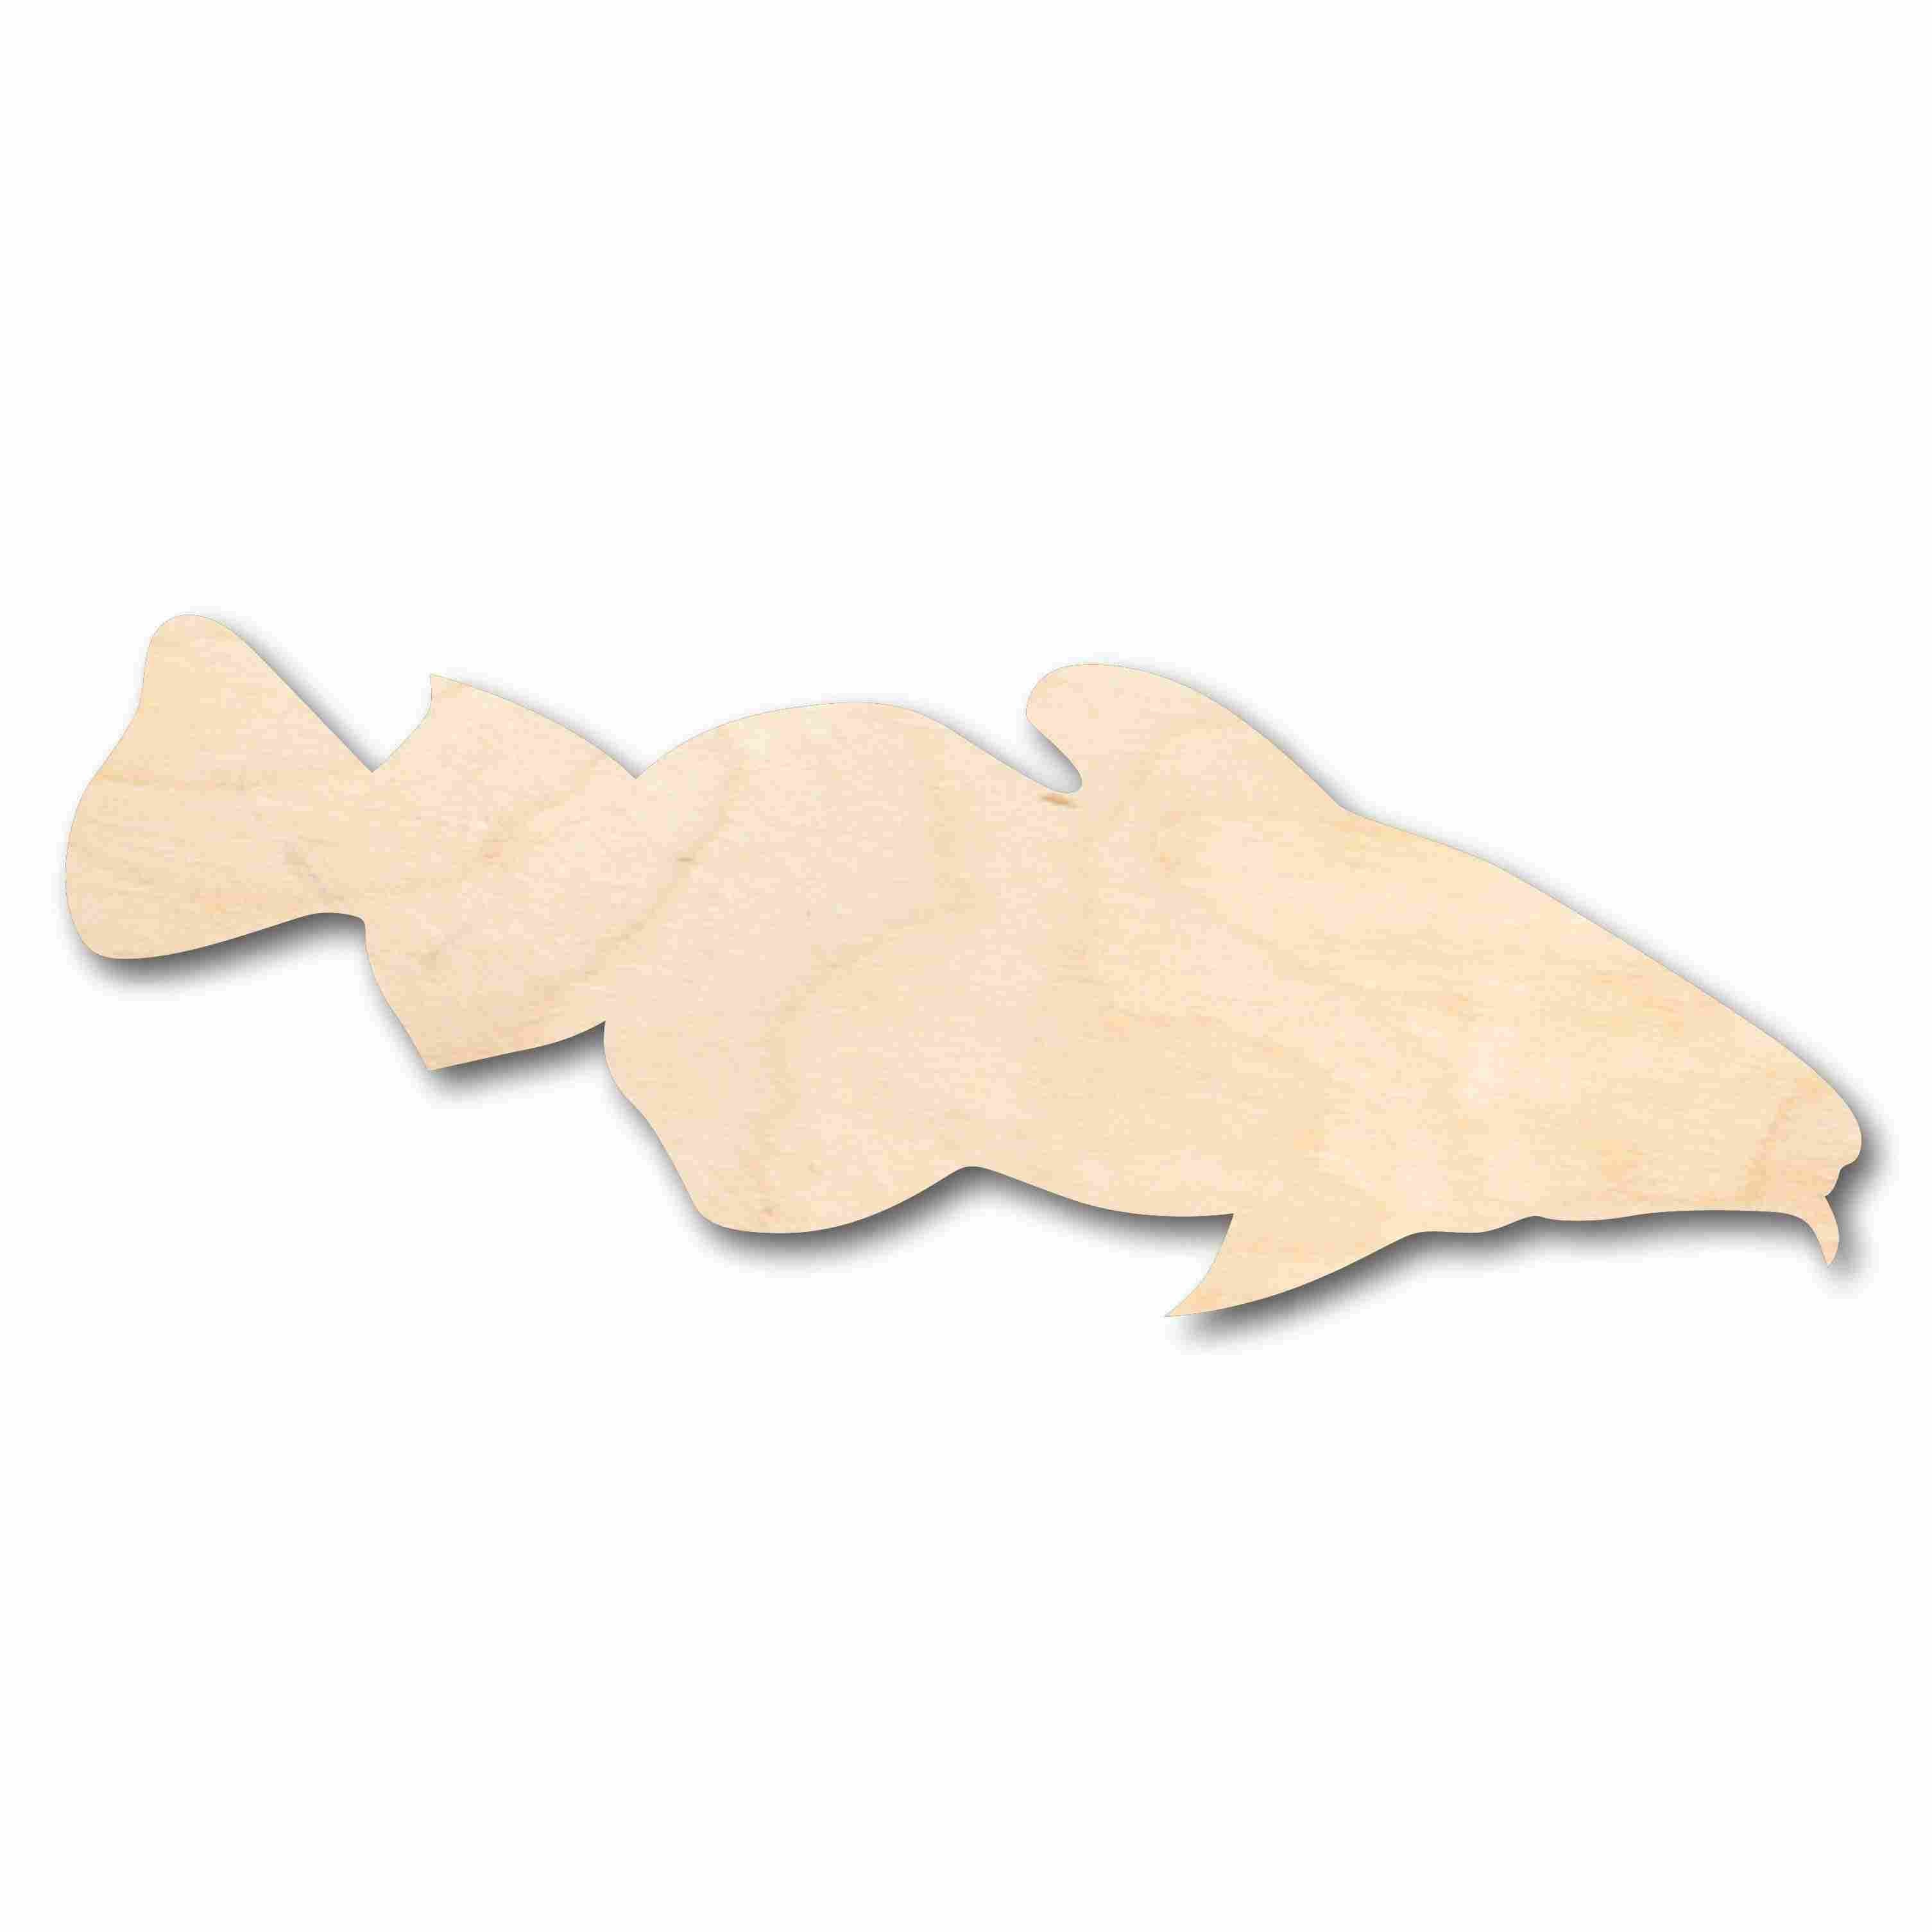 Unfinished Wood Cod Fish Silhouette - Craft- up to 24